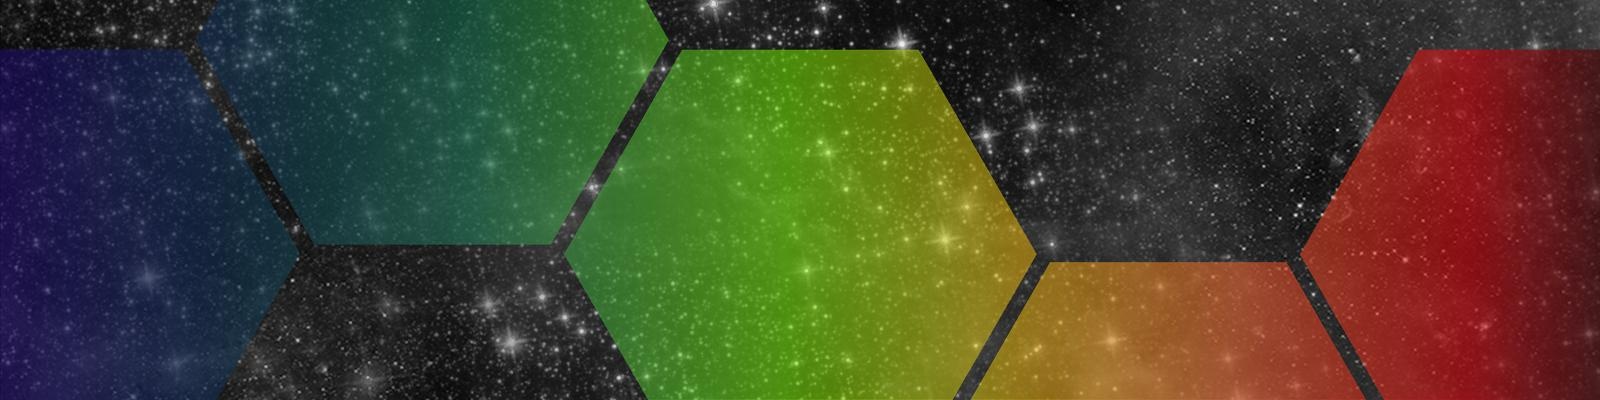 Hexagon shapes filled with a color spectrum over a starry background